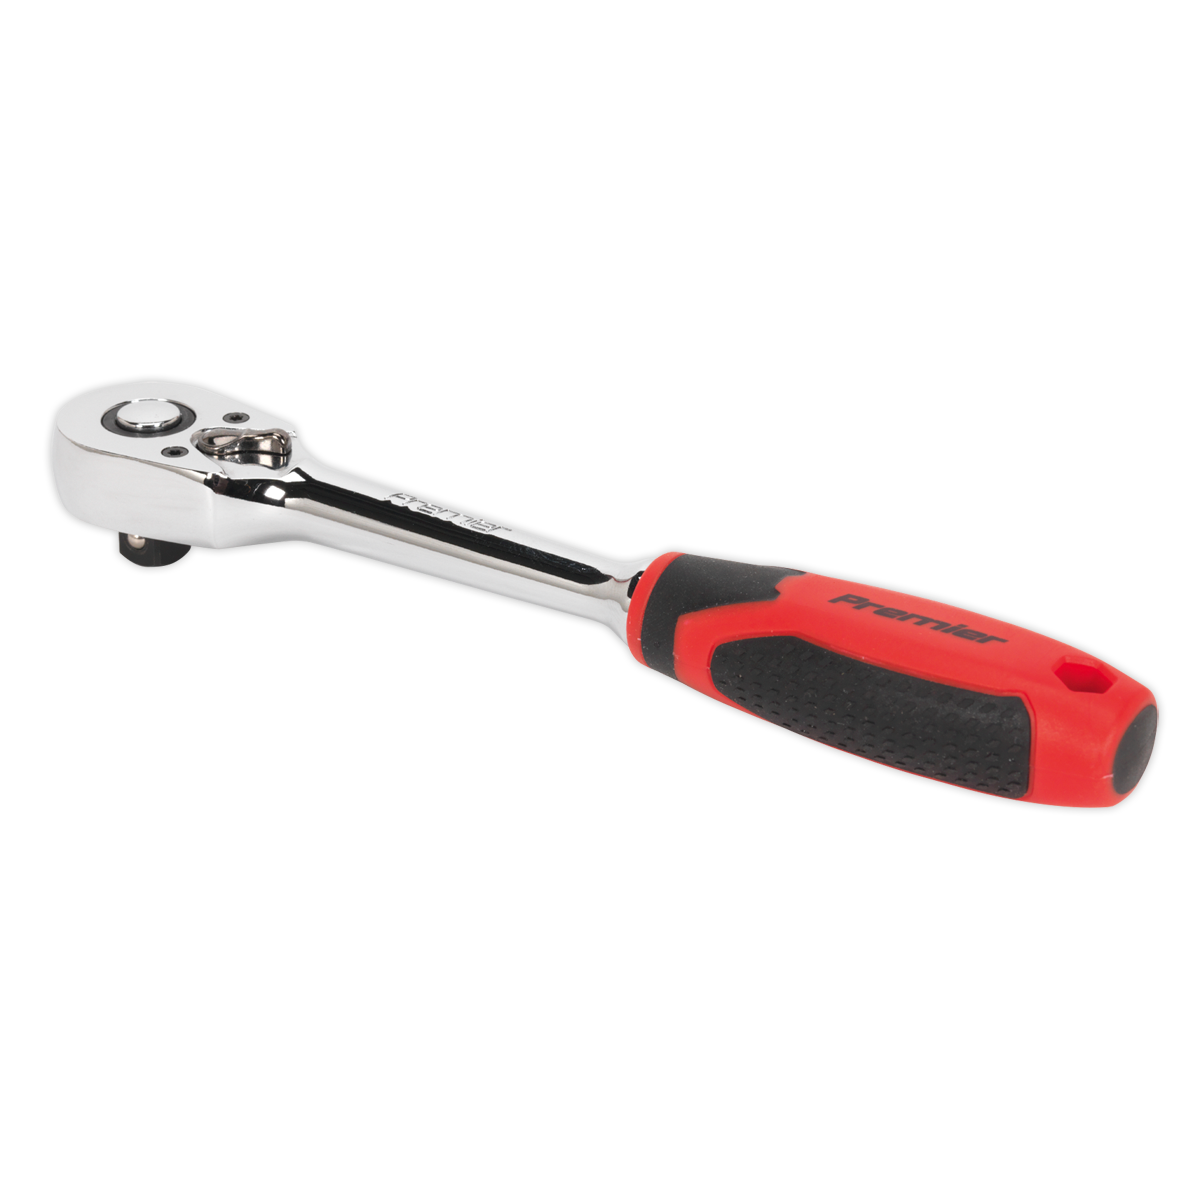 Sealey 3/8"Sq Drive Pear-Head Ratchet Wrench with Flip Reverse AK8947